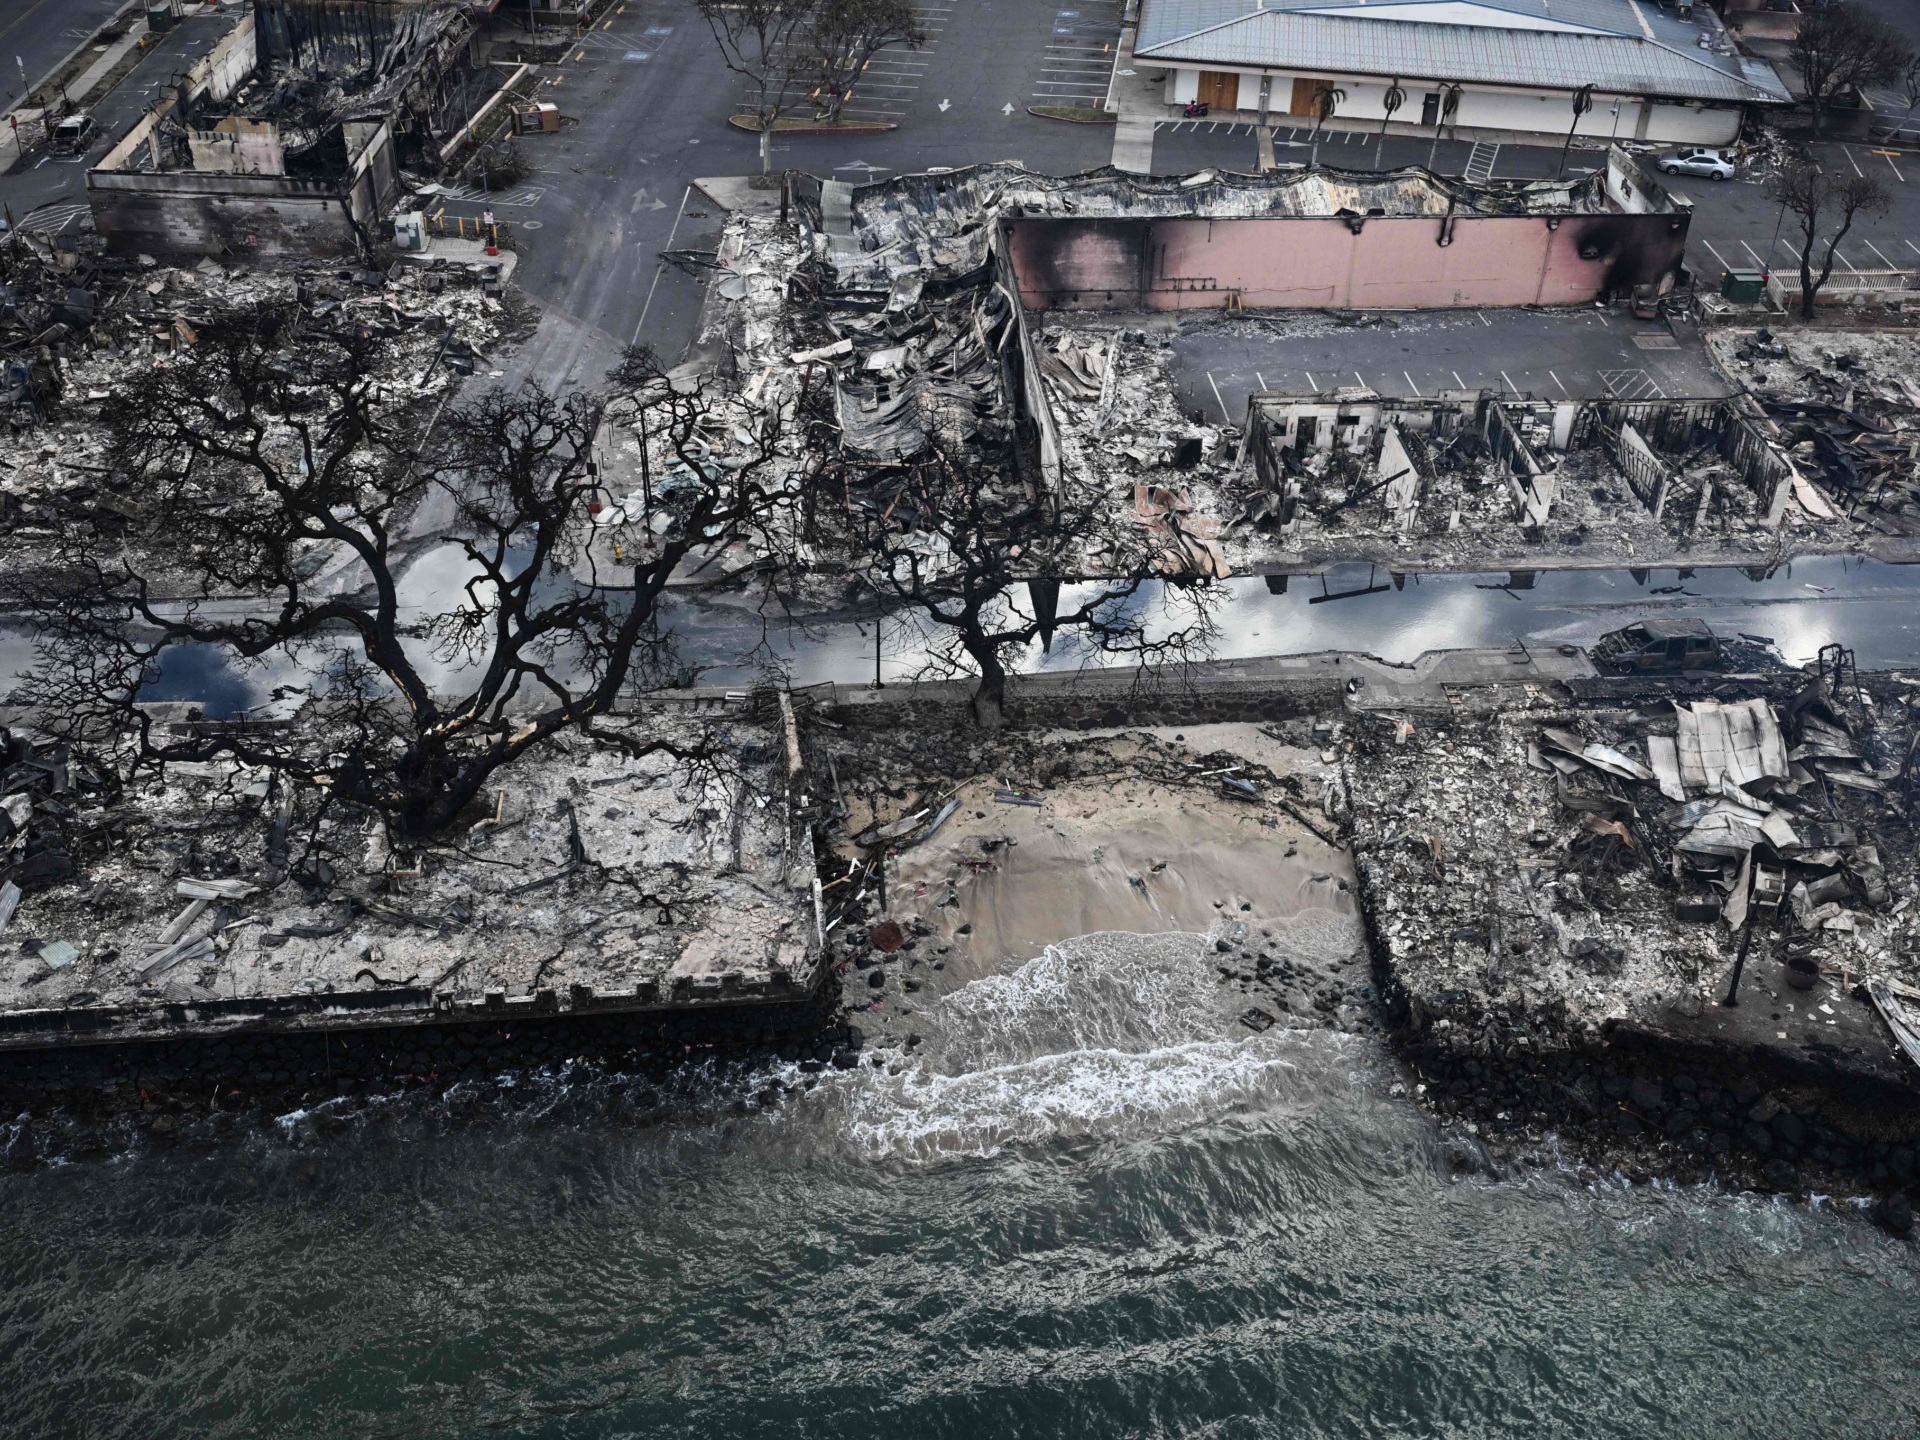 OPSHOT - An aerial image taken on August 10, 2023 shows destroyed homes and buildings on the waterfront burned to the ground in Lahaina in the aftermath of wildfires in western Maui, Hawaii. At least 36 people have died after a fast-moving wildfire turned Lahaina to ashes, officials said August 9, 2023 as visitors asked to leave the island of Maui found themselves stranded at the airport. The fires began burning early August 8, scorching thousands of acres and putting homes, businesses and 35,000 lives at risk on Maui, the Hawaii Emergency Management Agency said in a statement. (Photo by Patrick T. Fallon / AFP) (Photo by PATRICK T. FALLON/AFP via Getty Images)